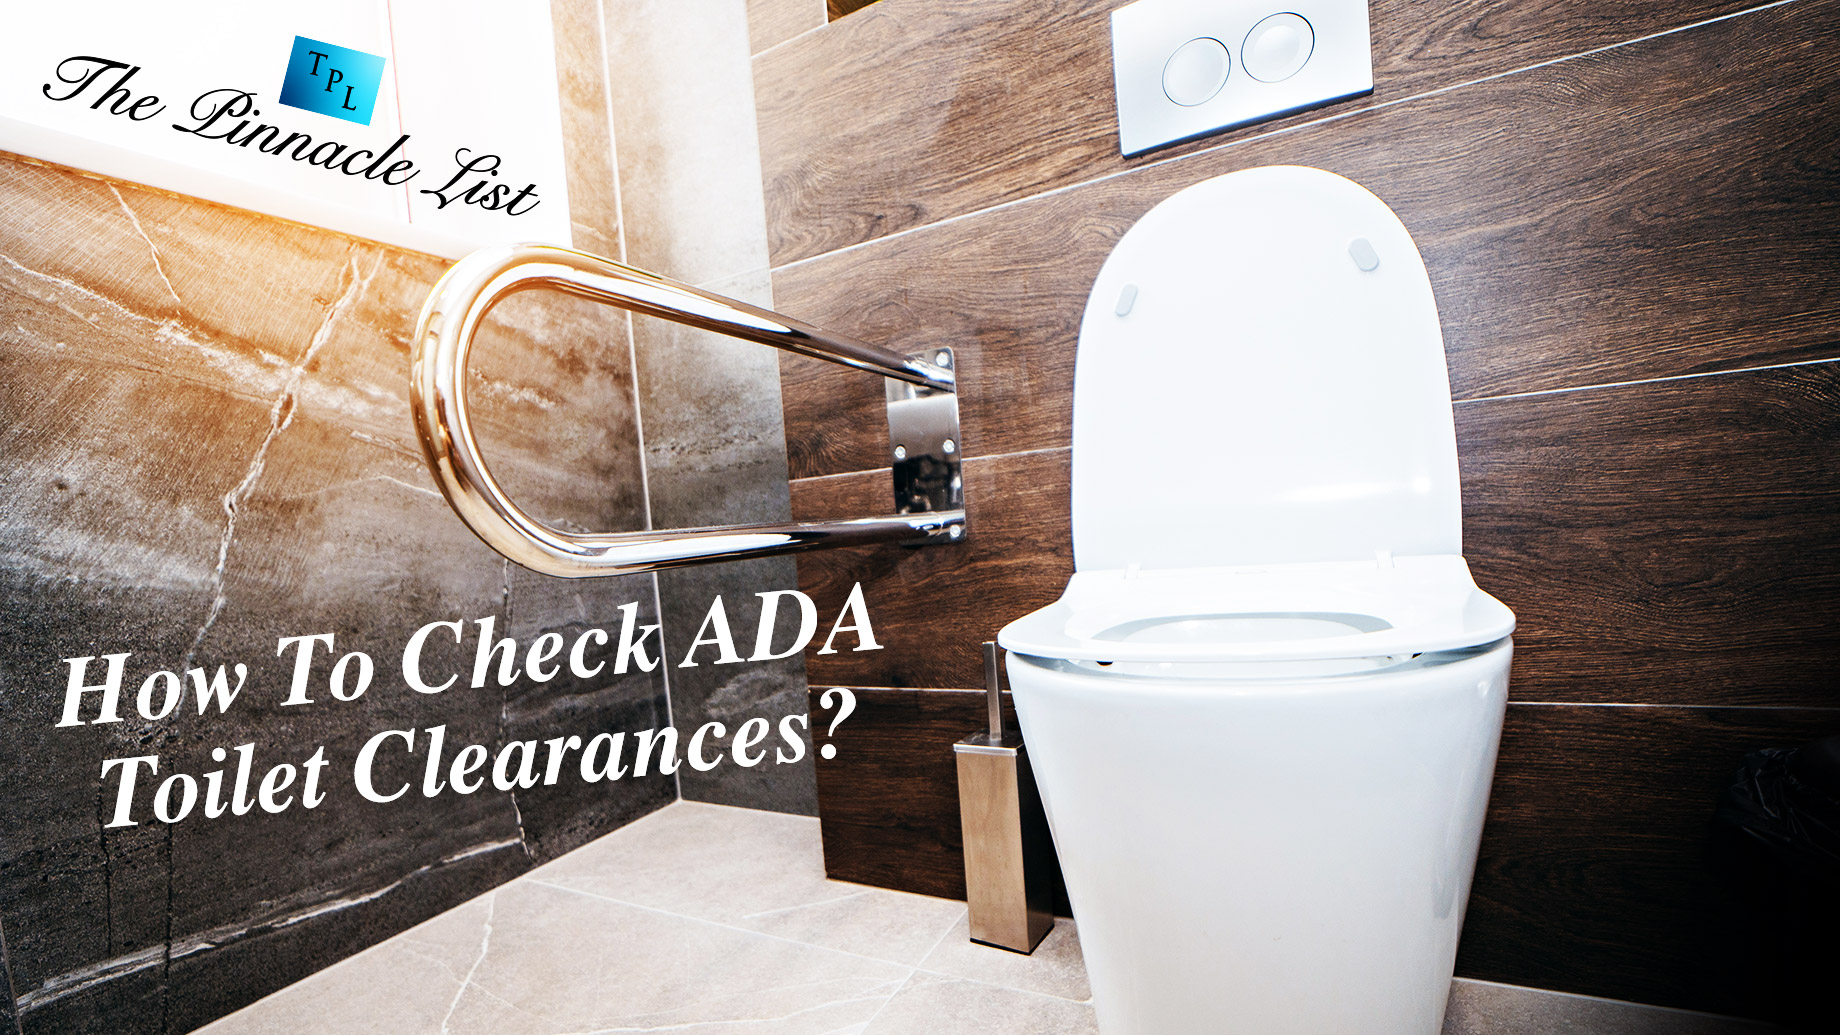 How To Check ADA Toilet Clearances?